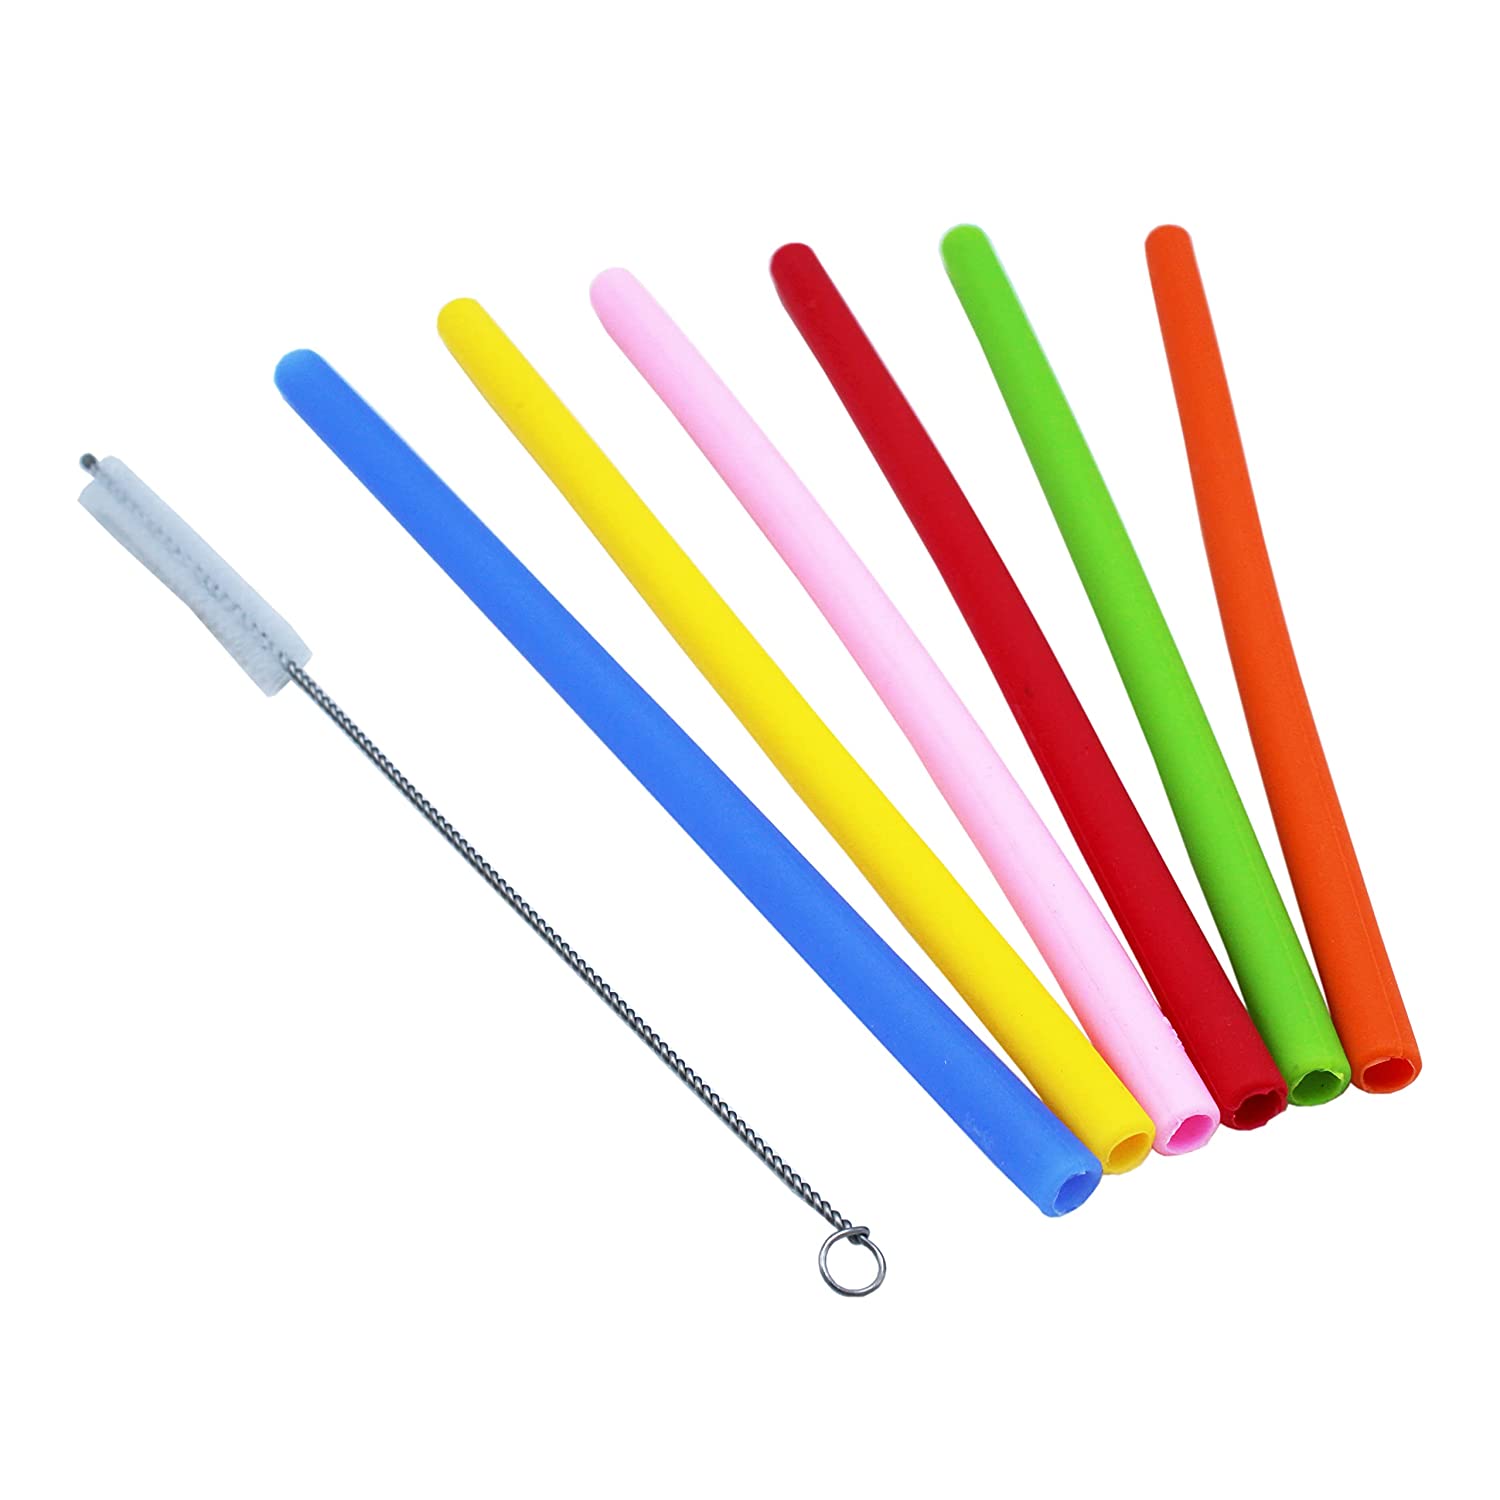 Reusable straw; extra long straws; silicone straw